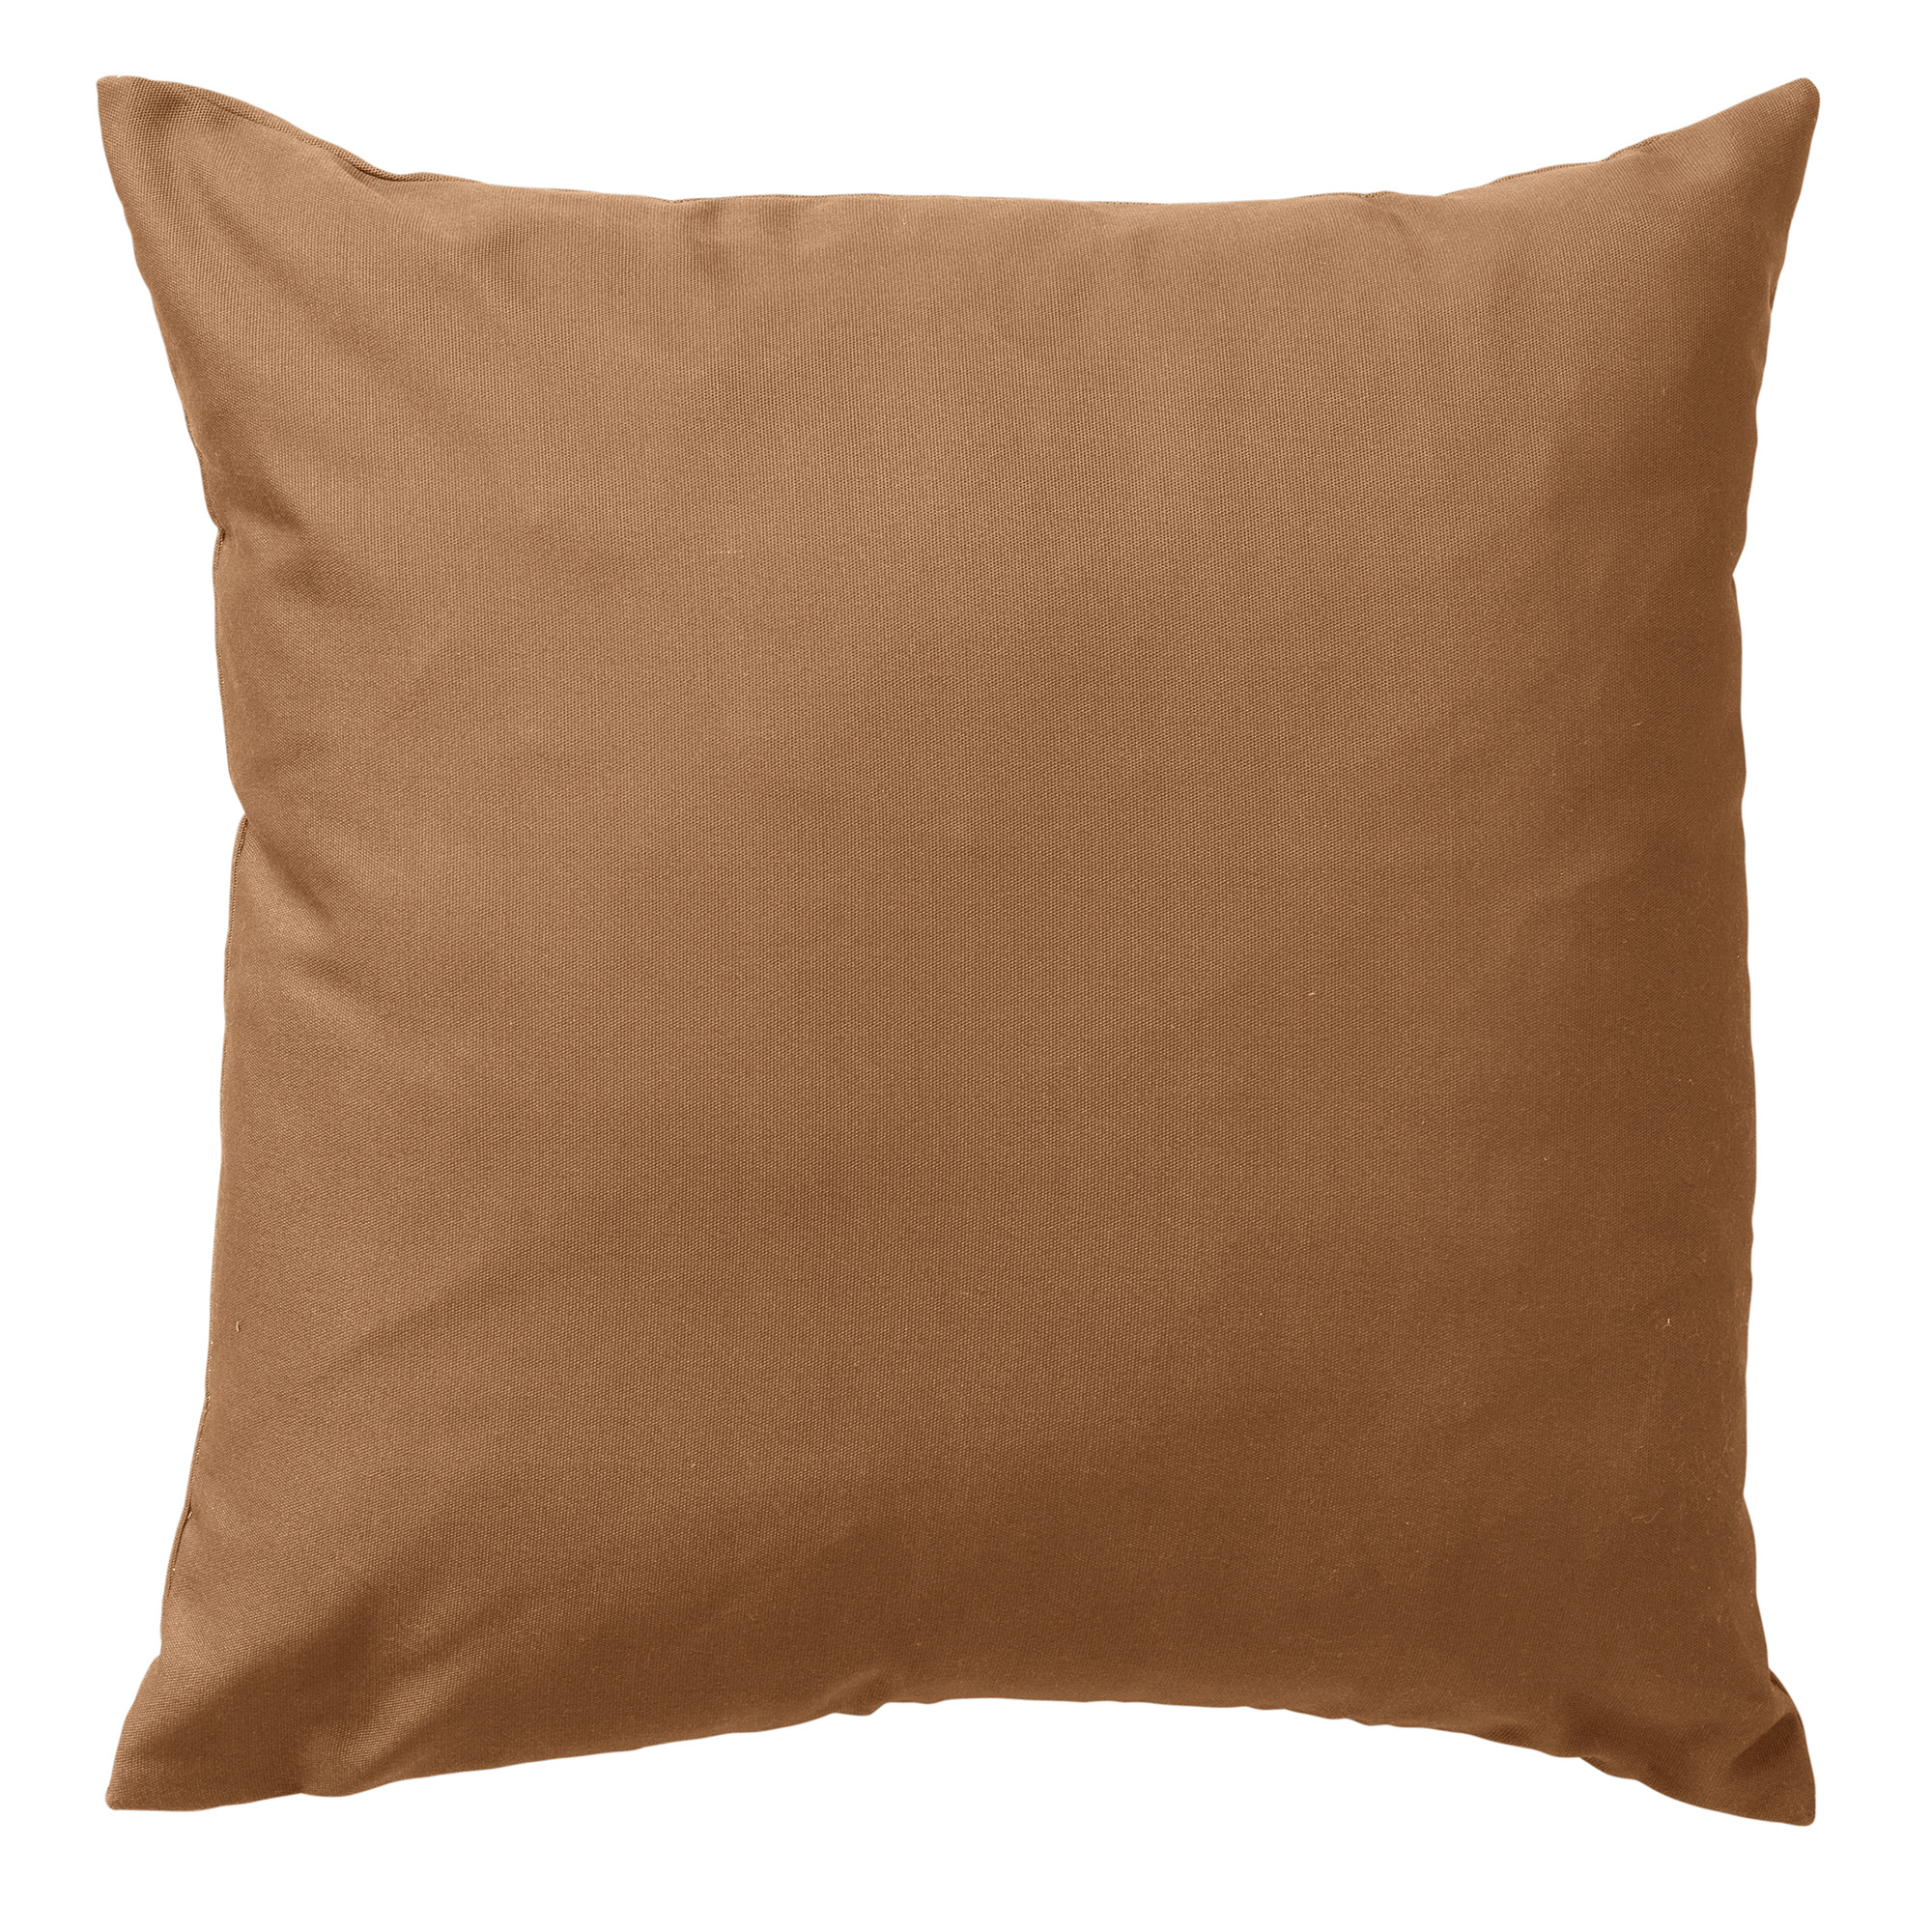 SANTORINI - Cushion cover outdoor 45x45 cm Tobacco Brown - water-repellent and UV-resistant - brown